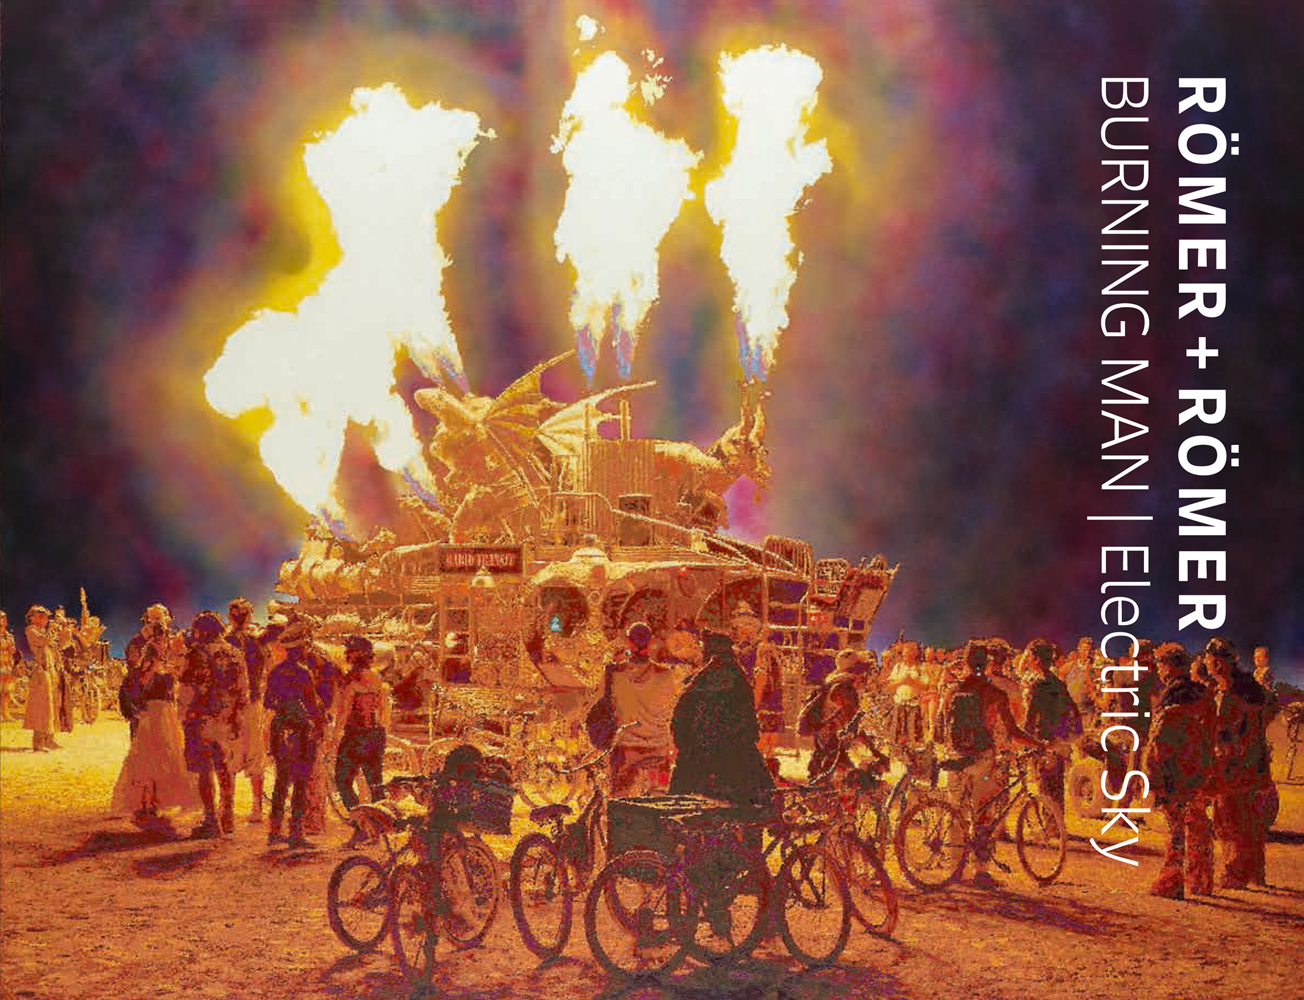 Landscape book cover of Romer + Romer, Burning Man/Electric Sky, with art installation shooting out fire into night sky, with crowds of people circling. Published by Verlag Kettler.